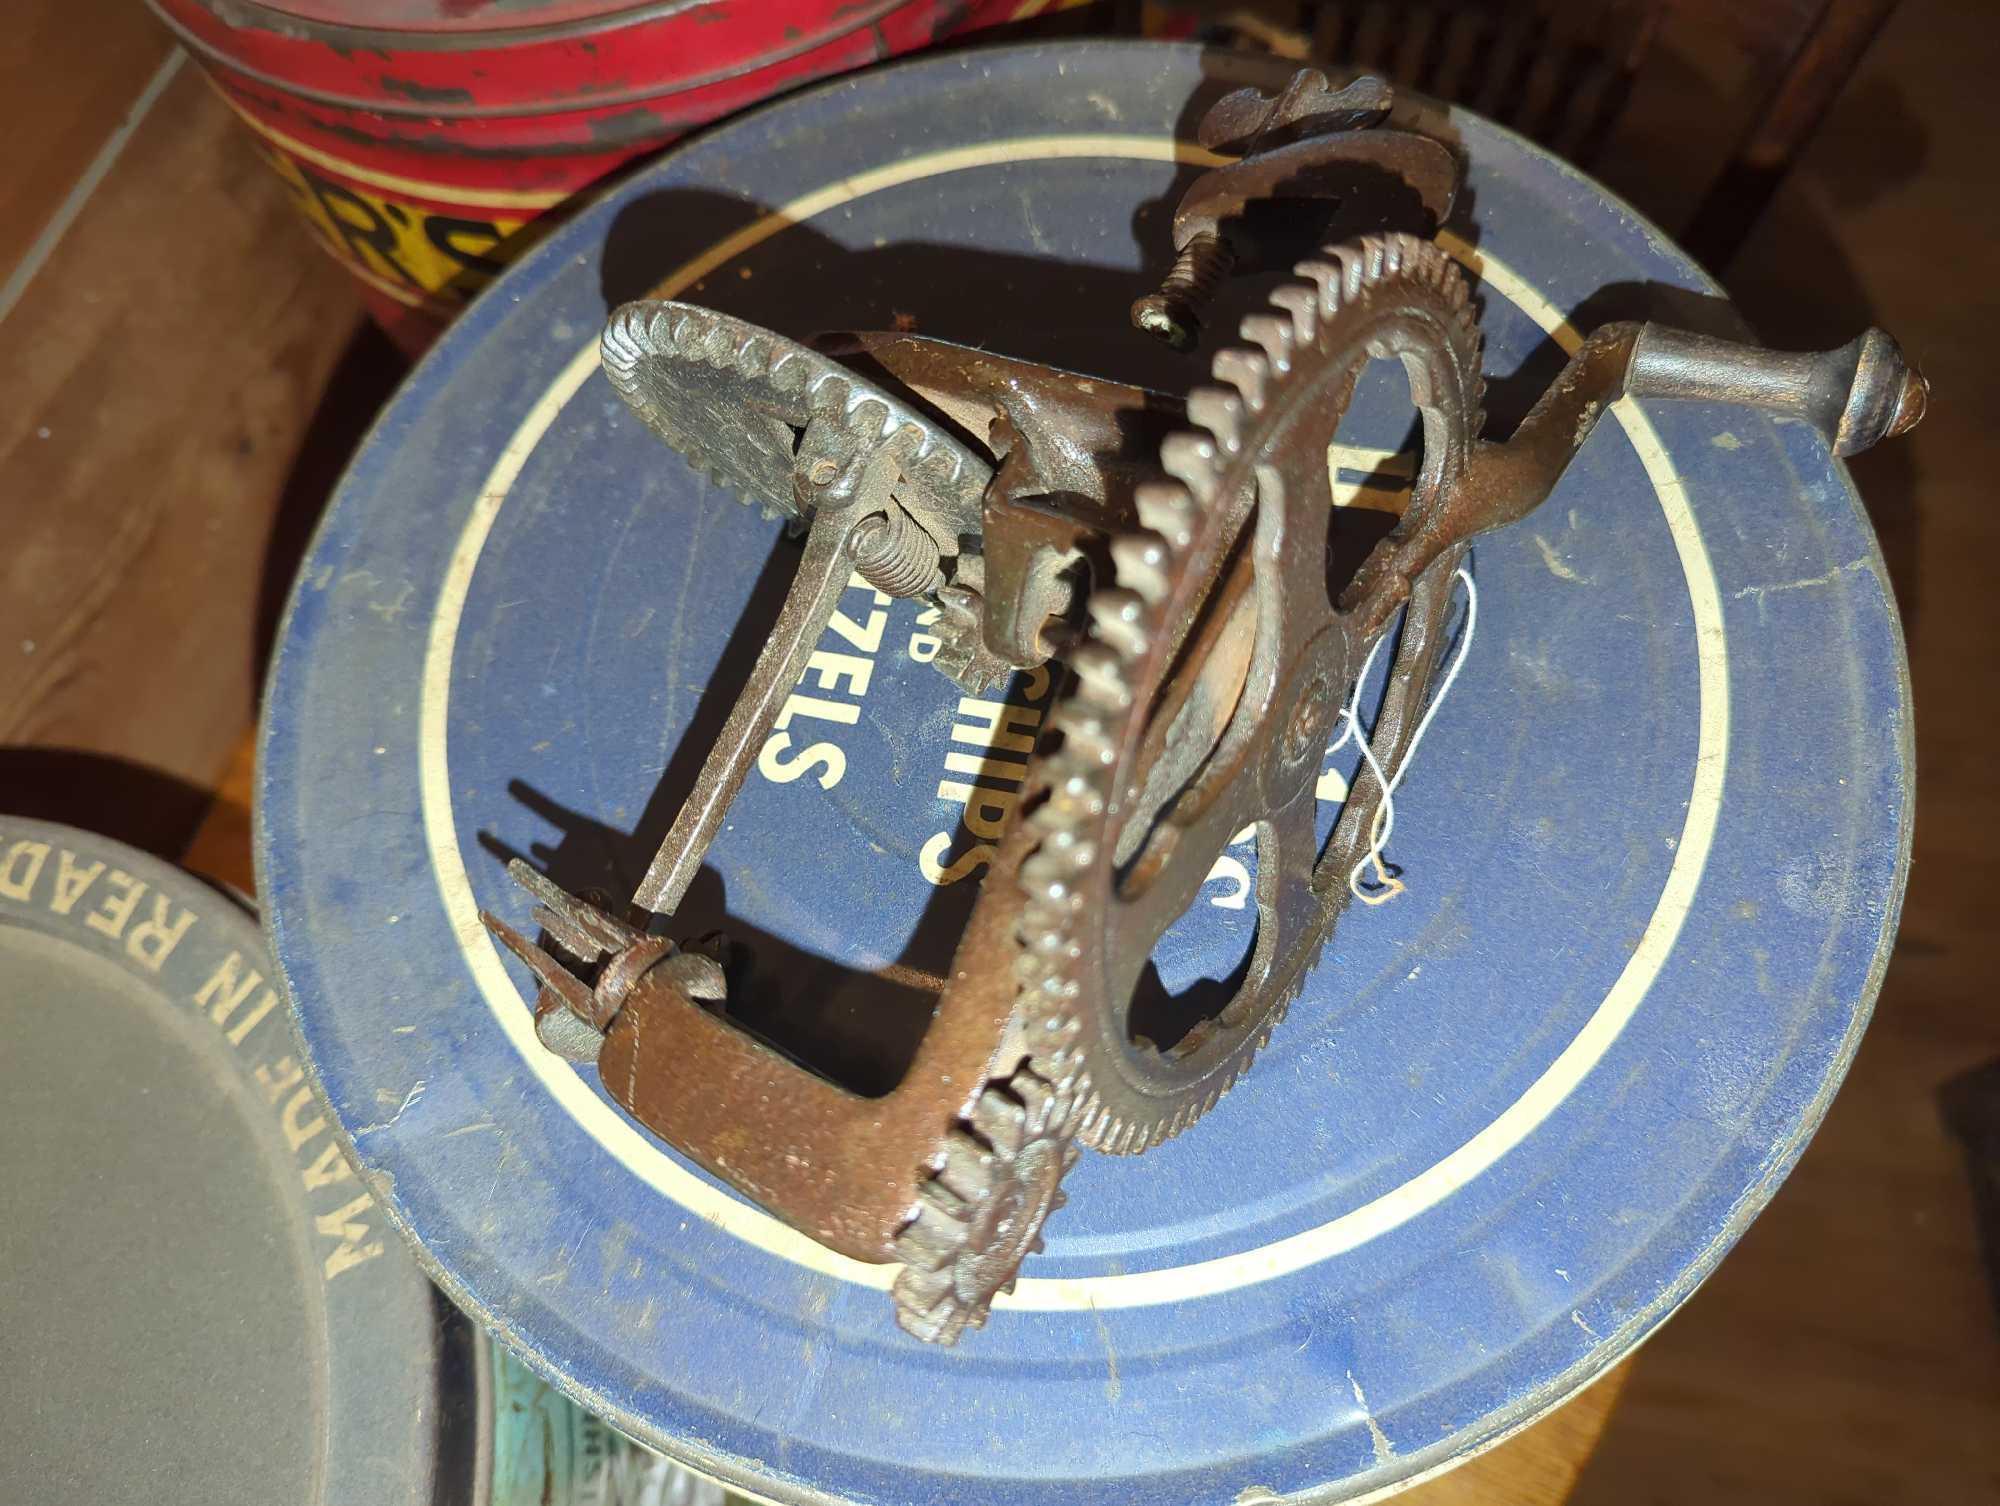 (DR) LOT OF ASSORTED ITEMS INCLUDING OLD STYLE APPLE PEELER, OLD STYLE CROCK CHICKEN FEEDER, 3